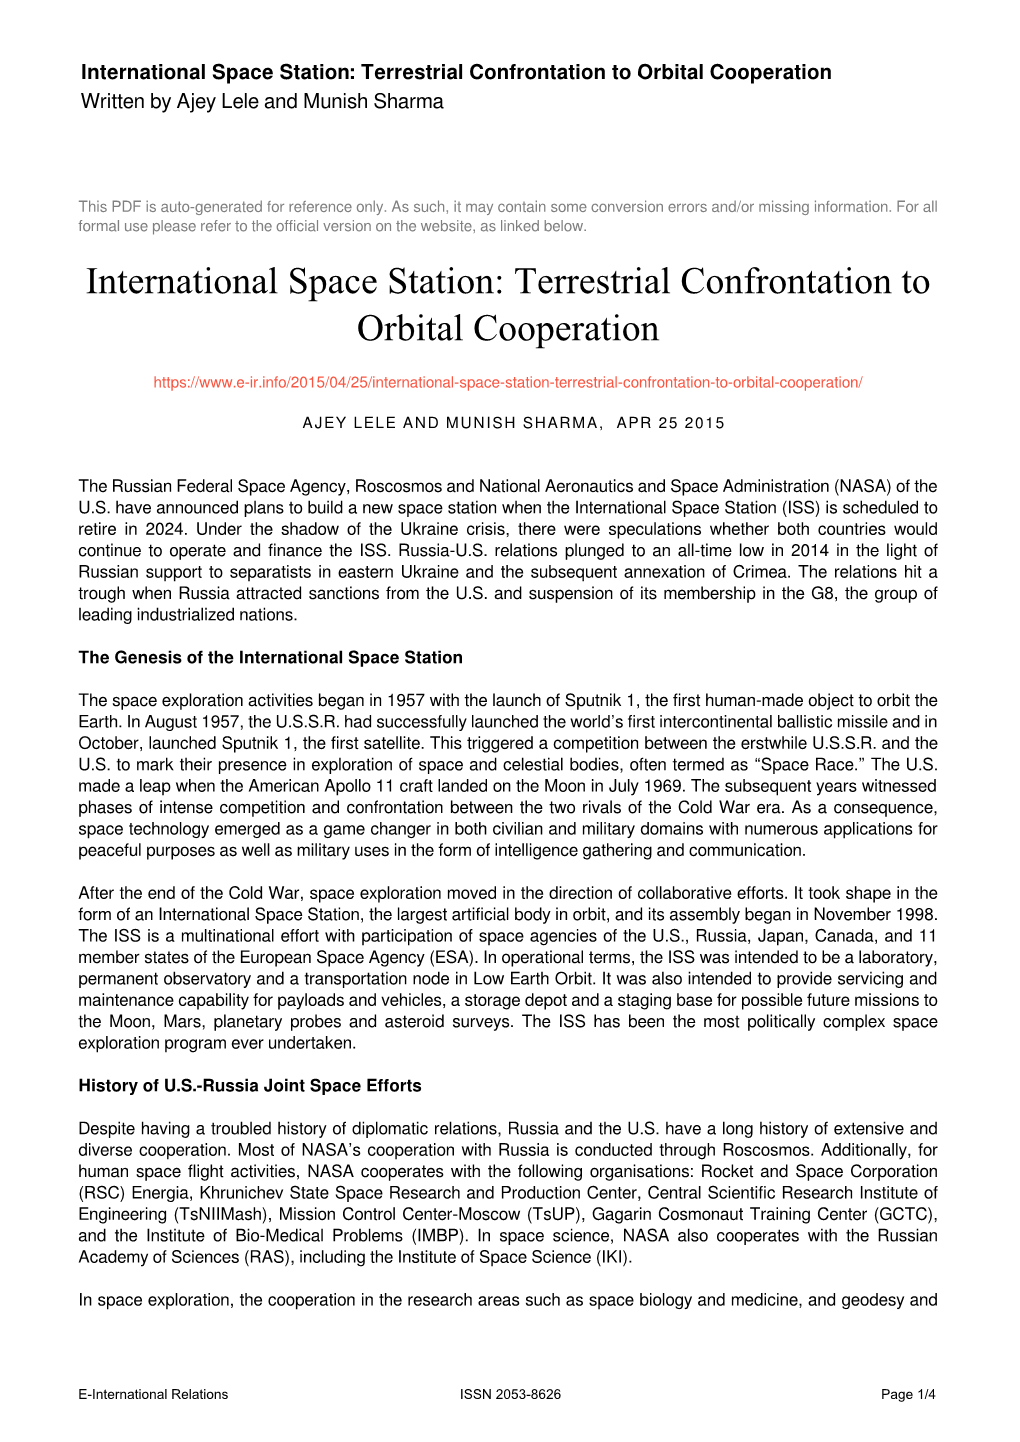 International Space Station: Terrestrial Confrontation to Orbital Cooperation Written by Ajey Lele and Munish Sharma